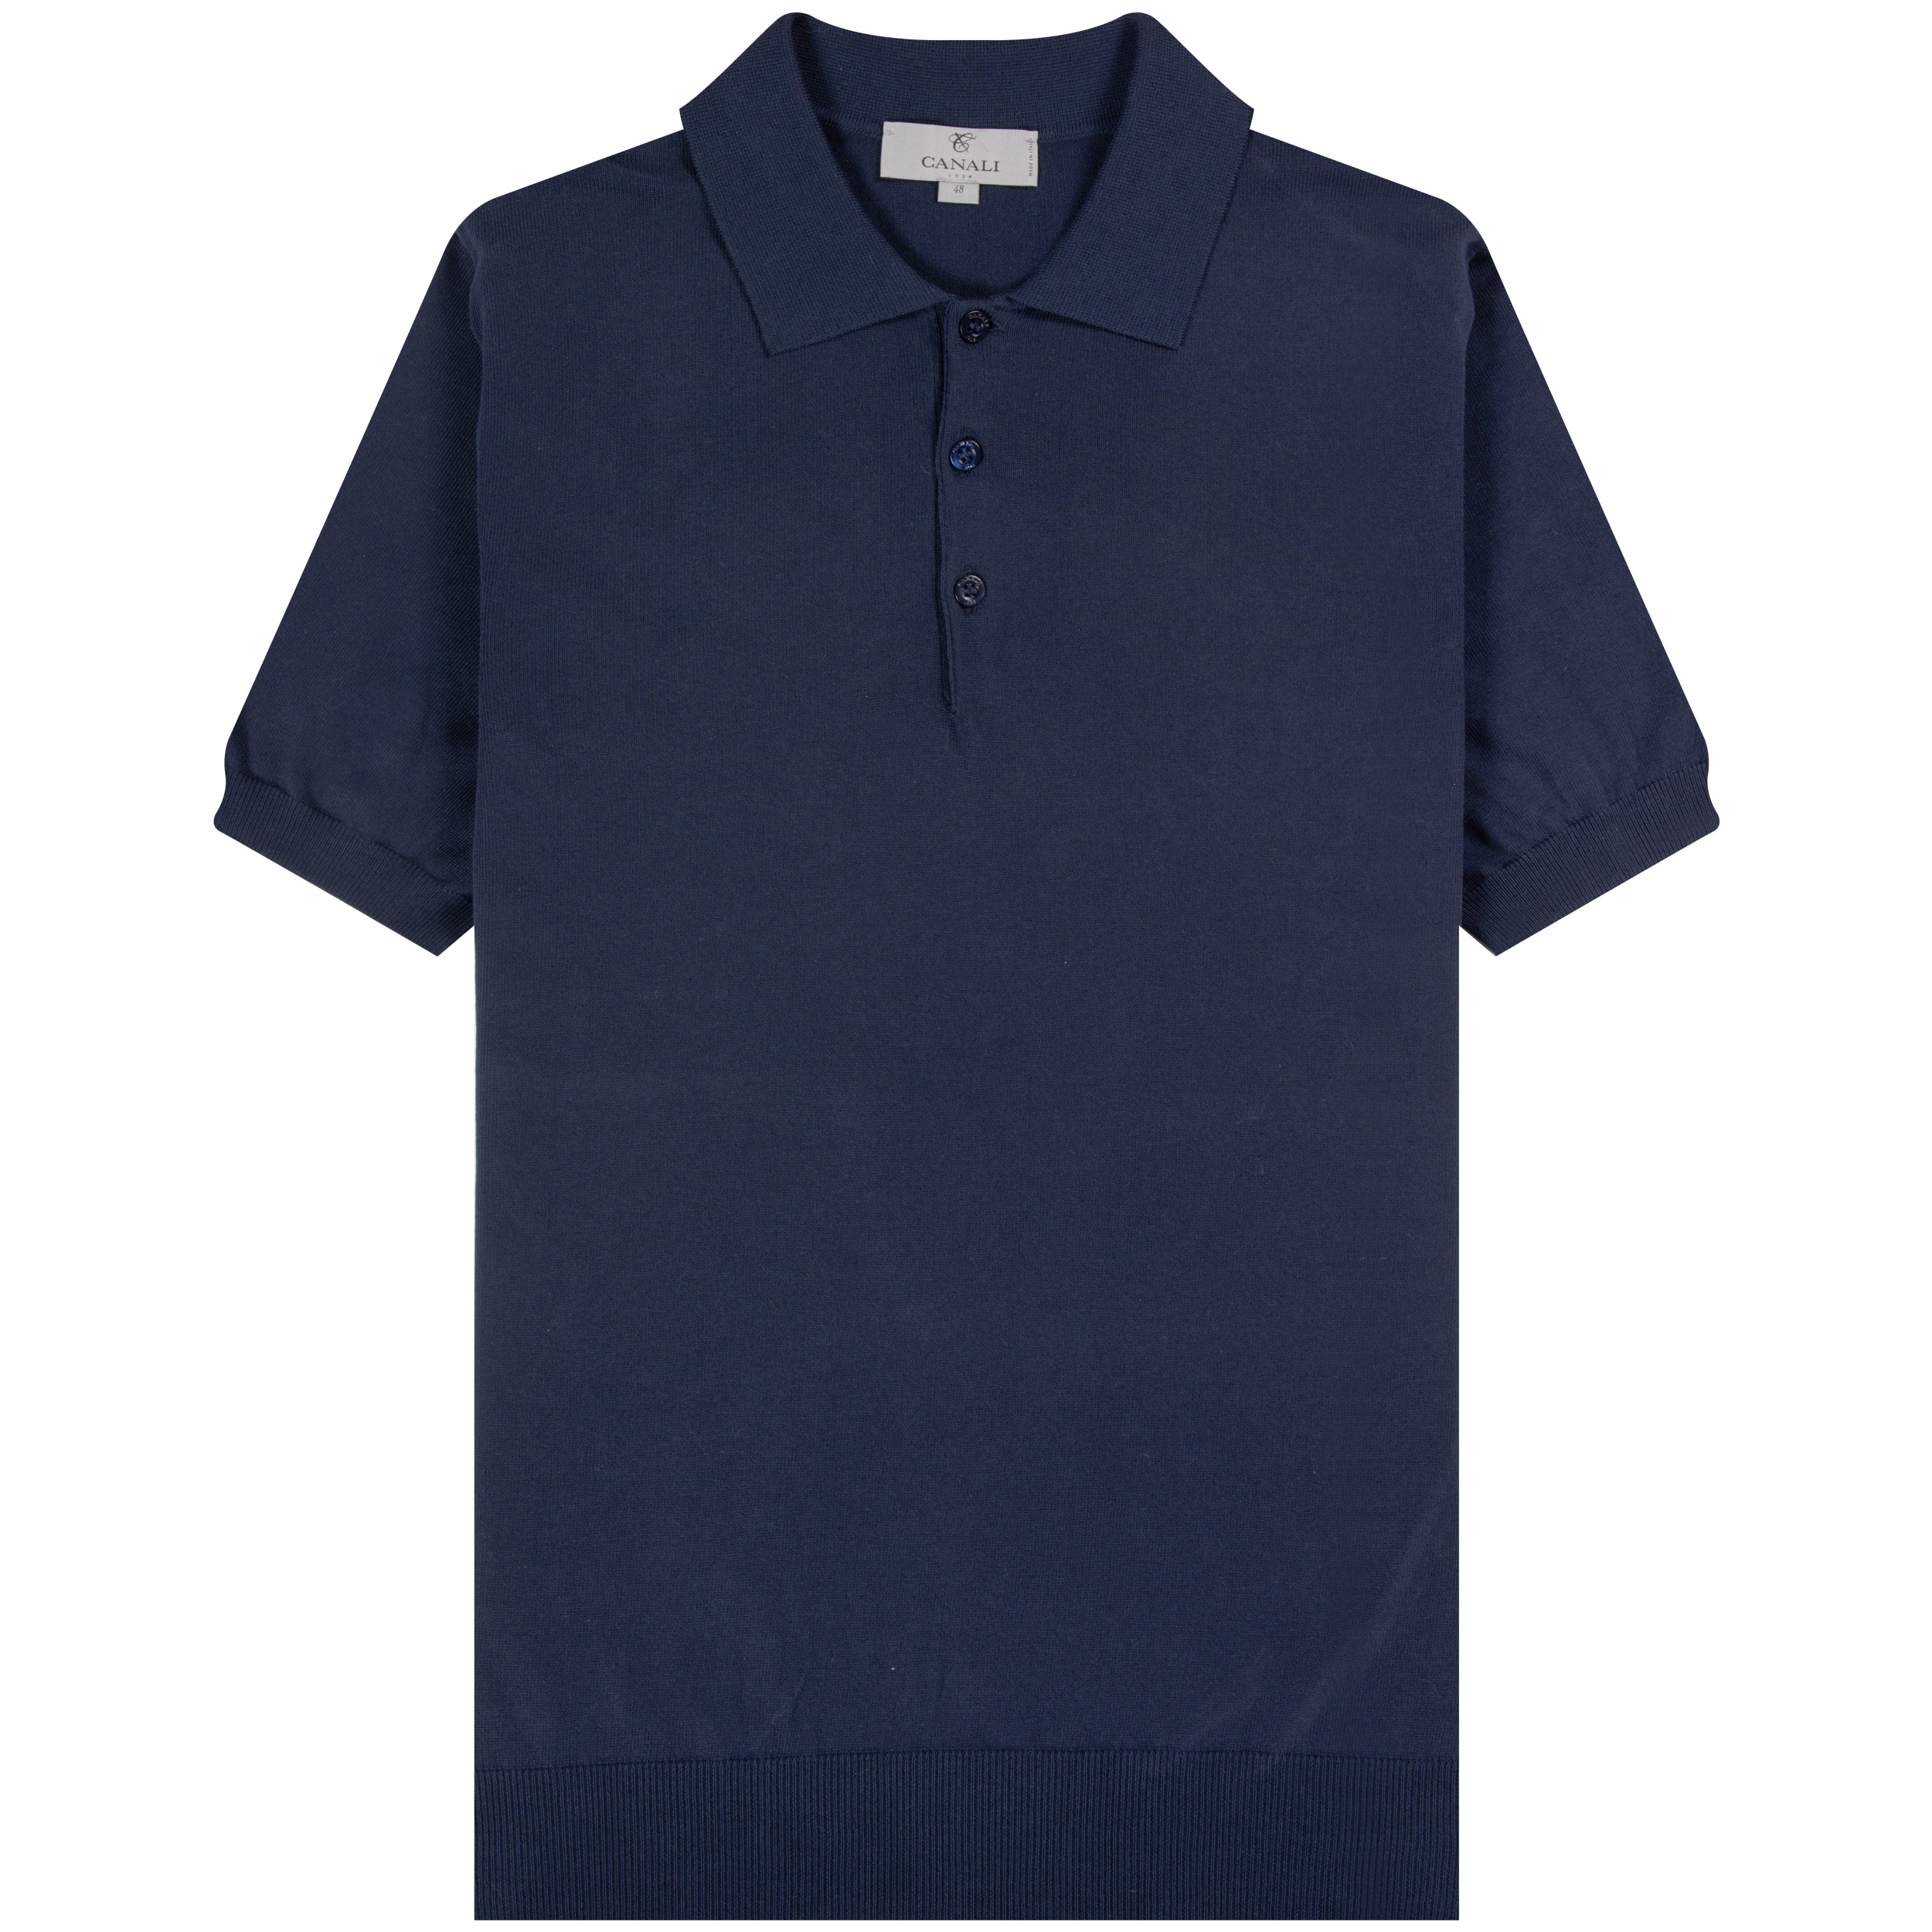 Canali ’Knitted’ SS Polo Shirt Navy